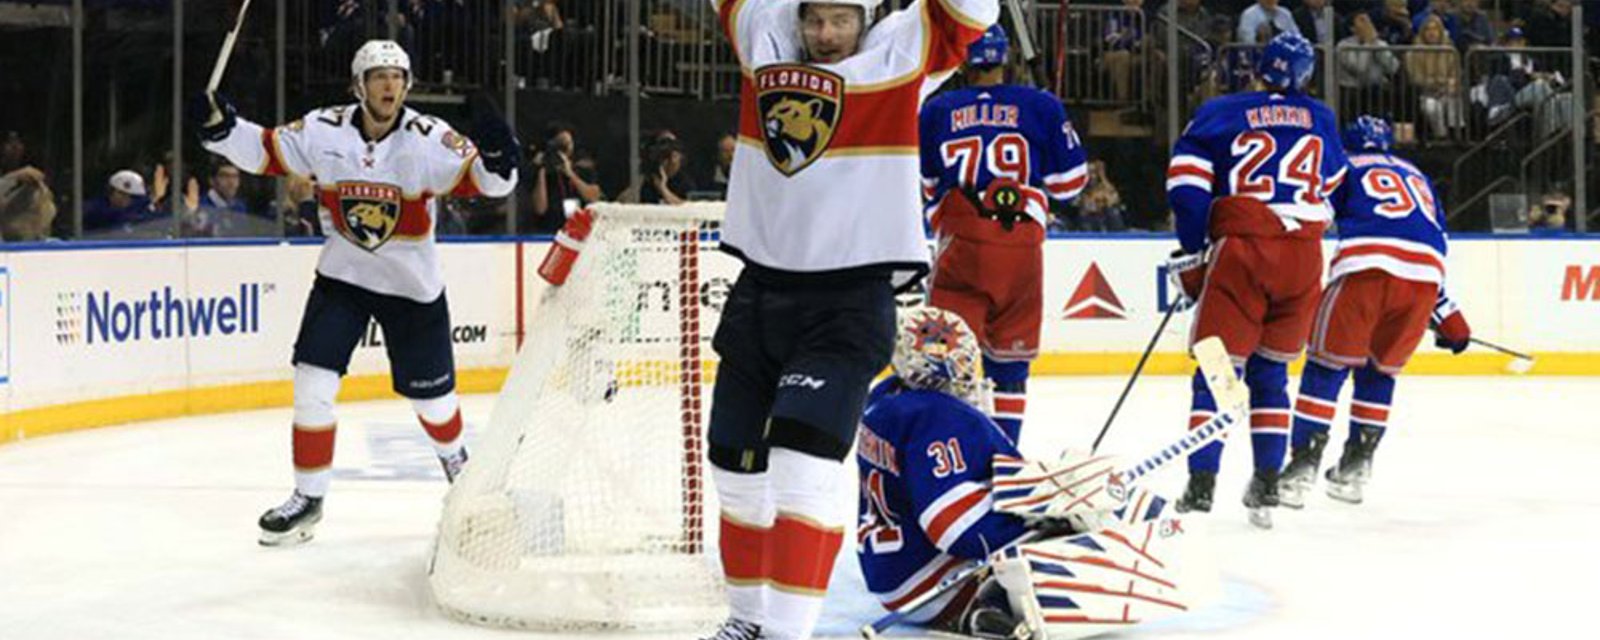 The Panthers hold on to win Game 5 after a late scare from the Rangers